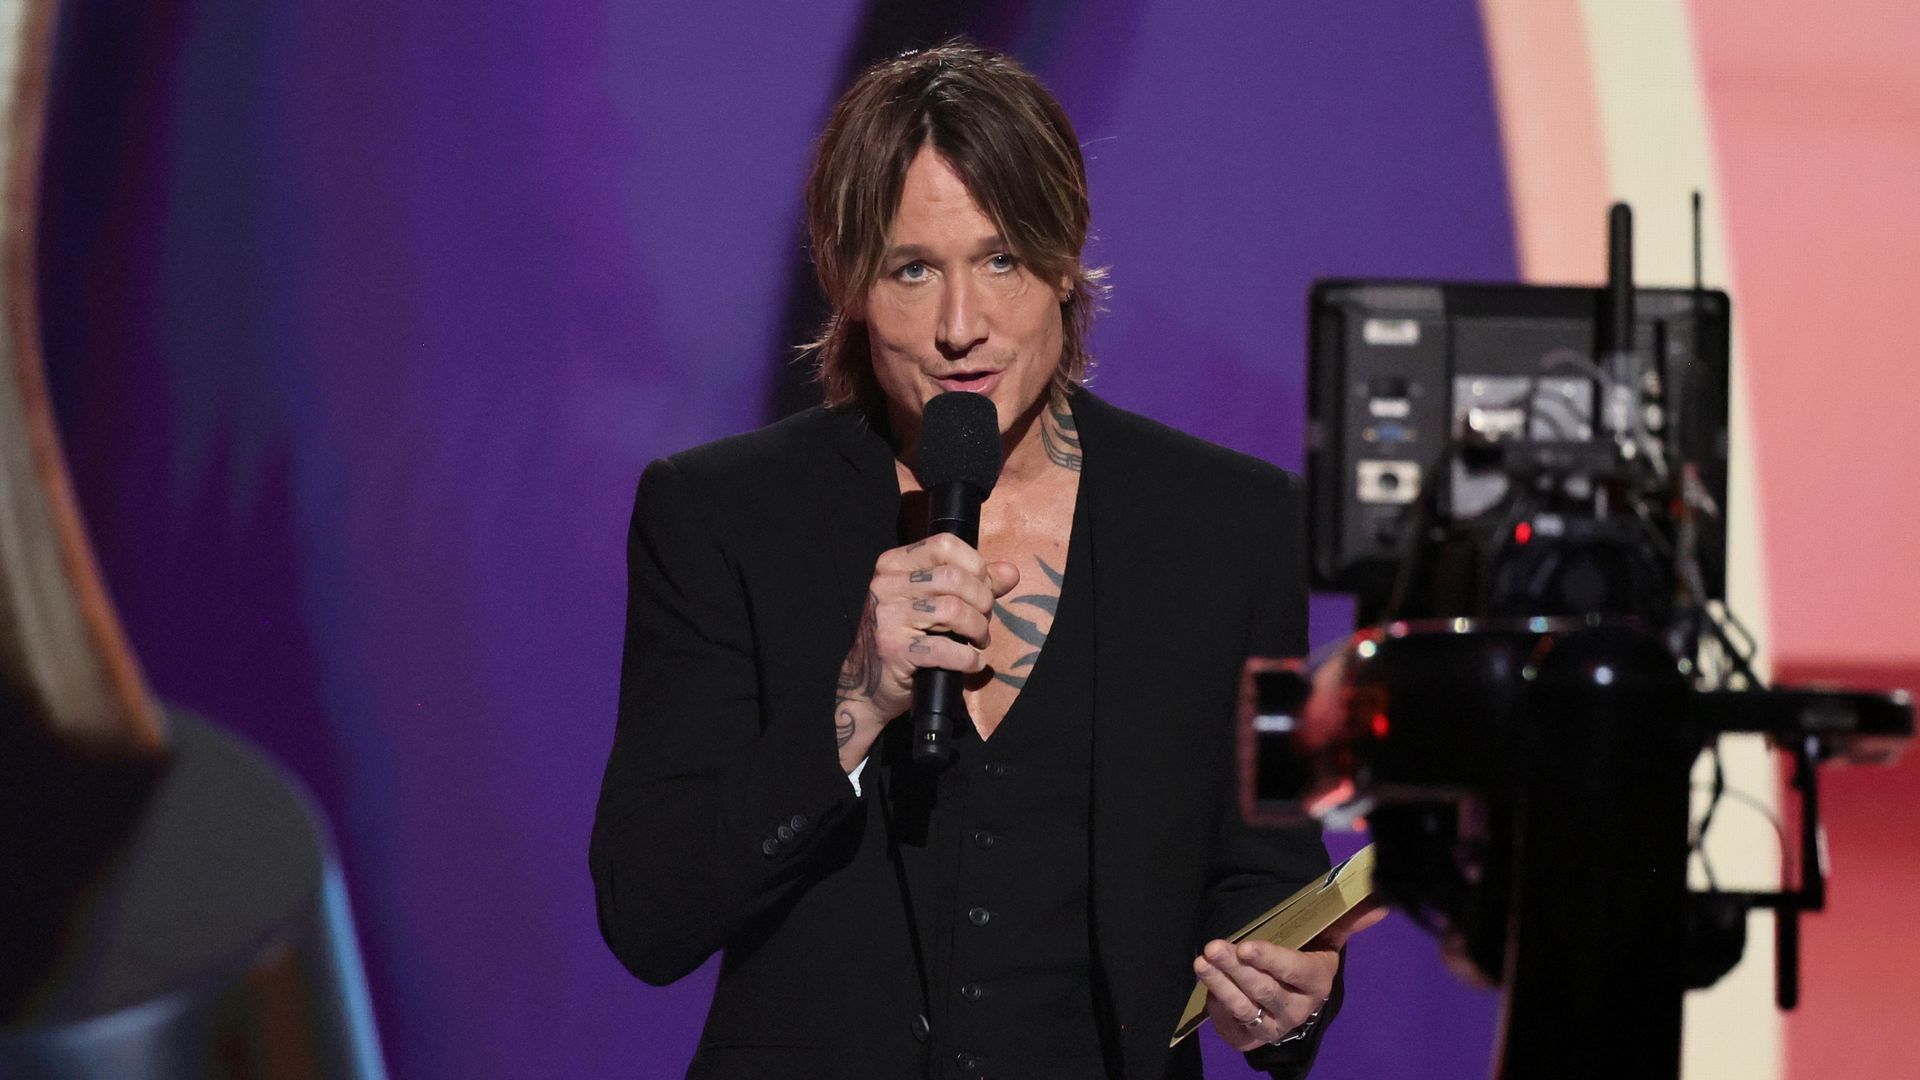 Keith on stage with a mic and awards envelope, a camera and teleprompter are in front of him